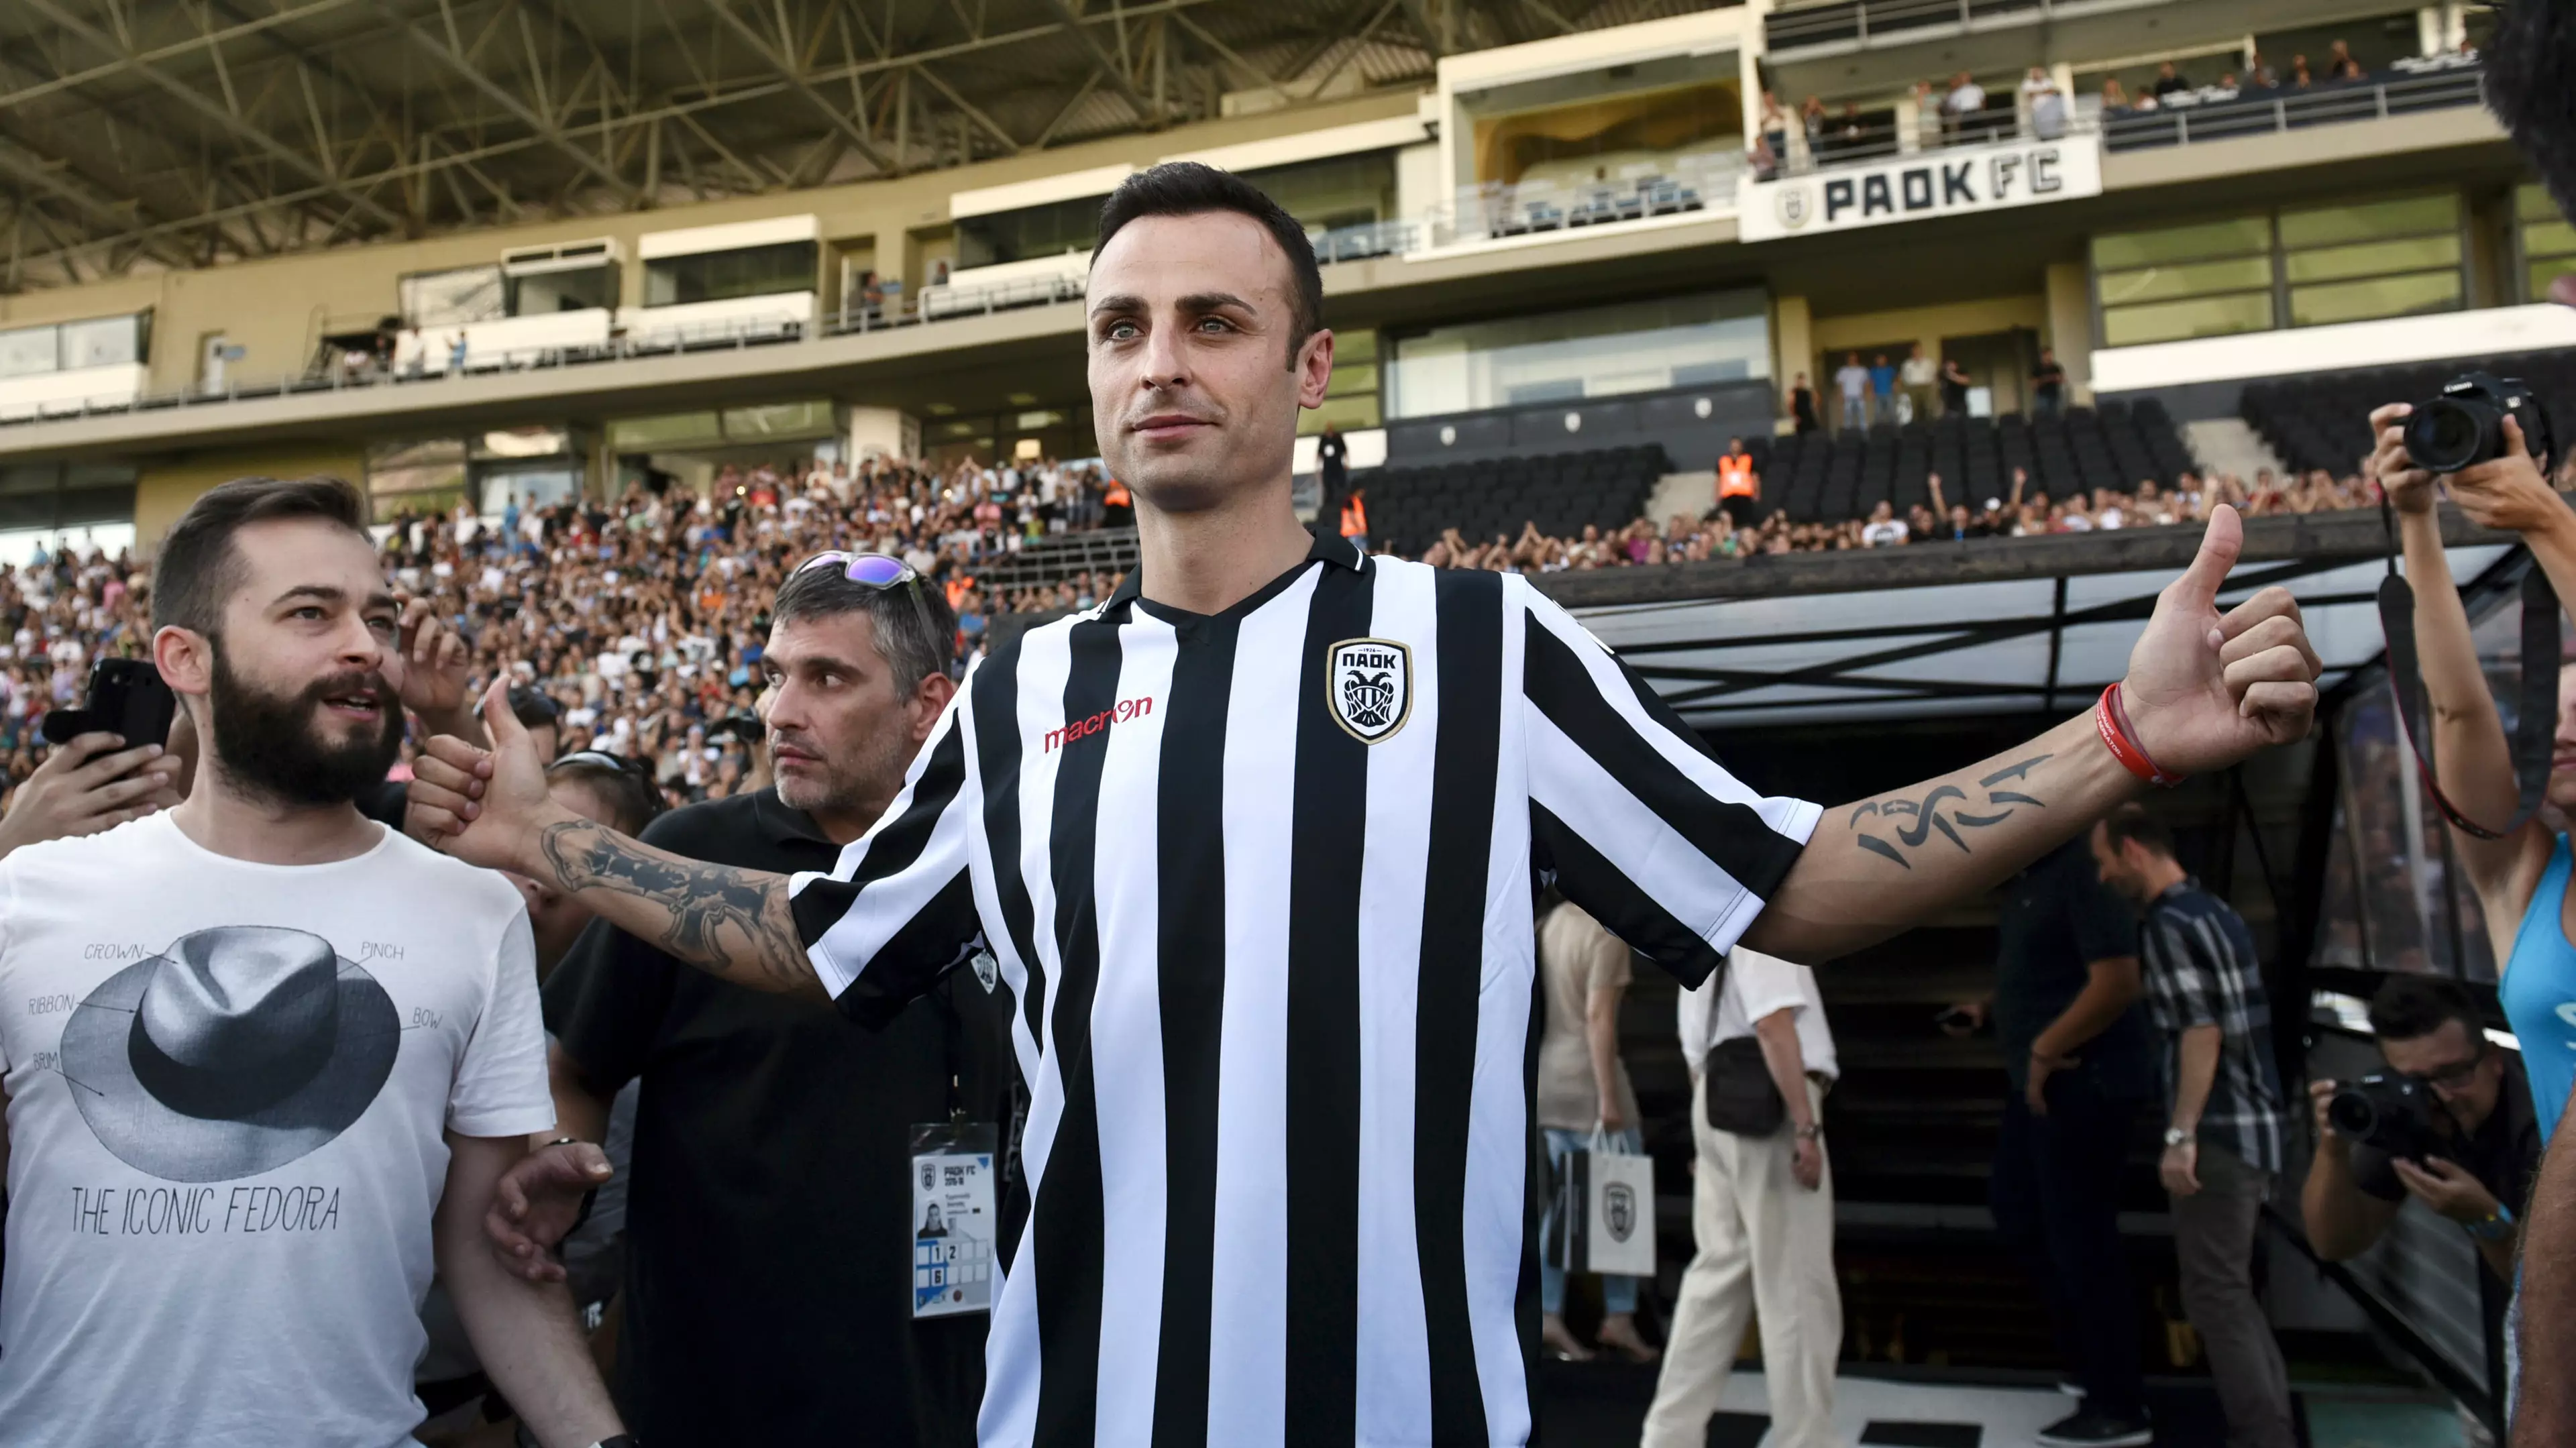 Dimitar Berbatov Sighting Starts One Of The Most Unbelievable Transfer Rumours